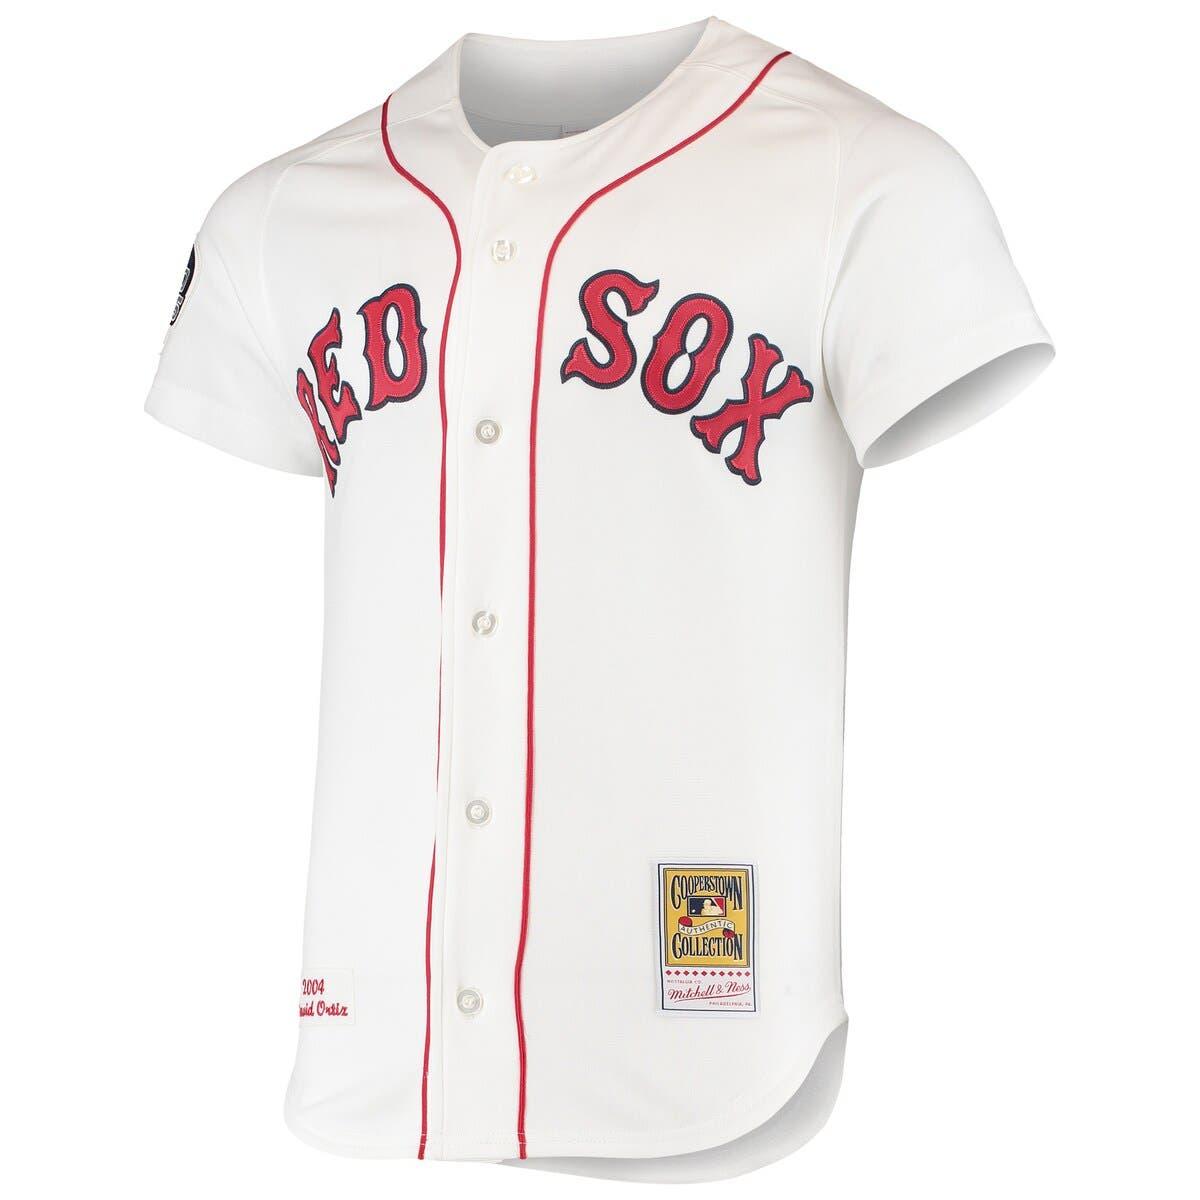 Mitchell & Ness Ted Williams Boston Red Sox 1990 Authentic Cooperstown Collection Batting Practice Jersey Navy